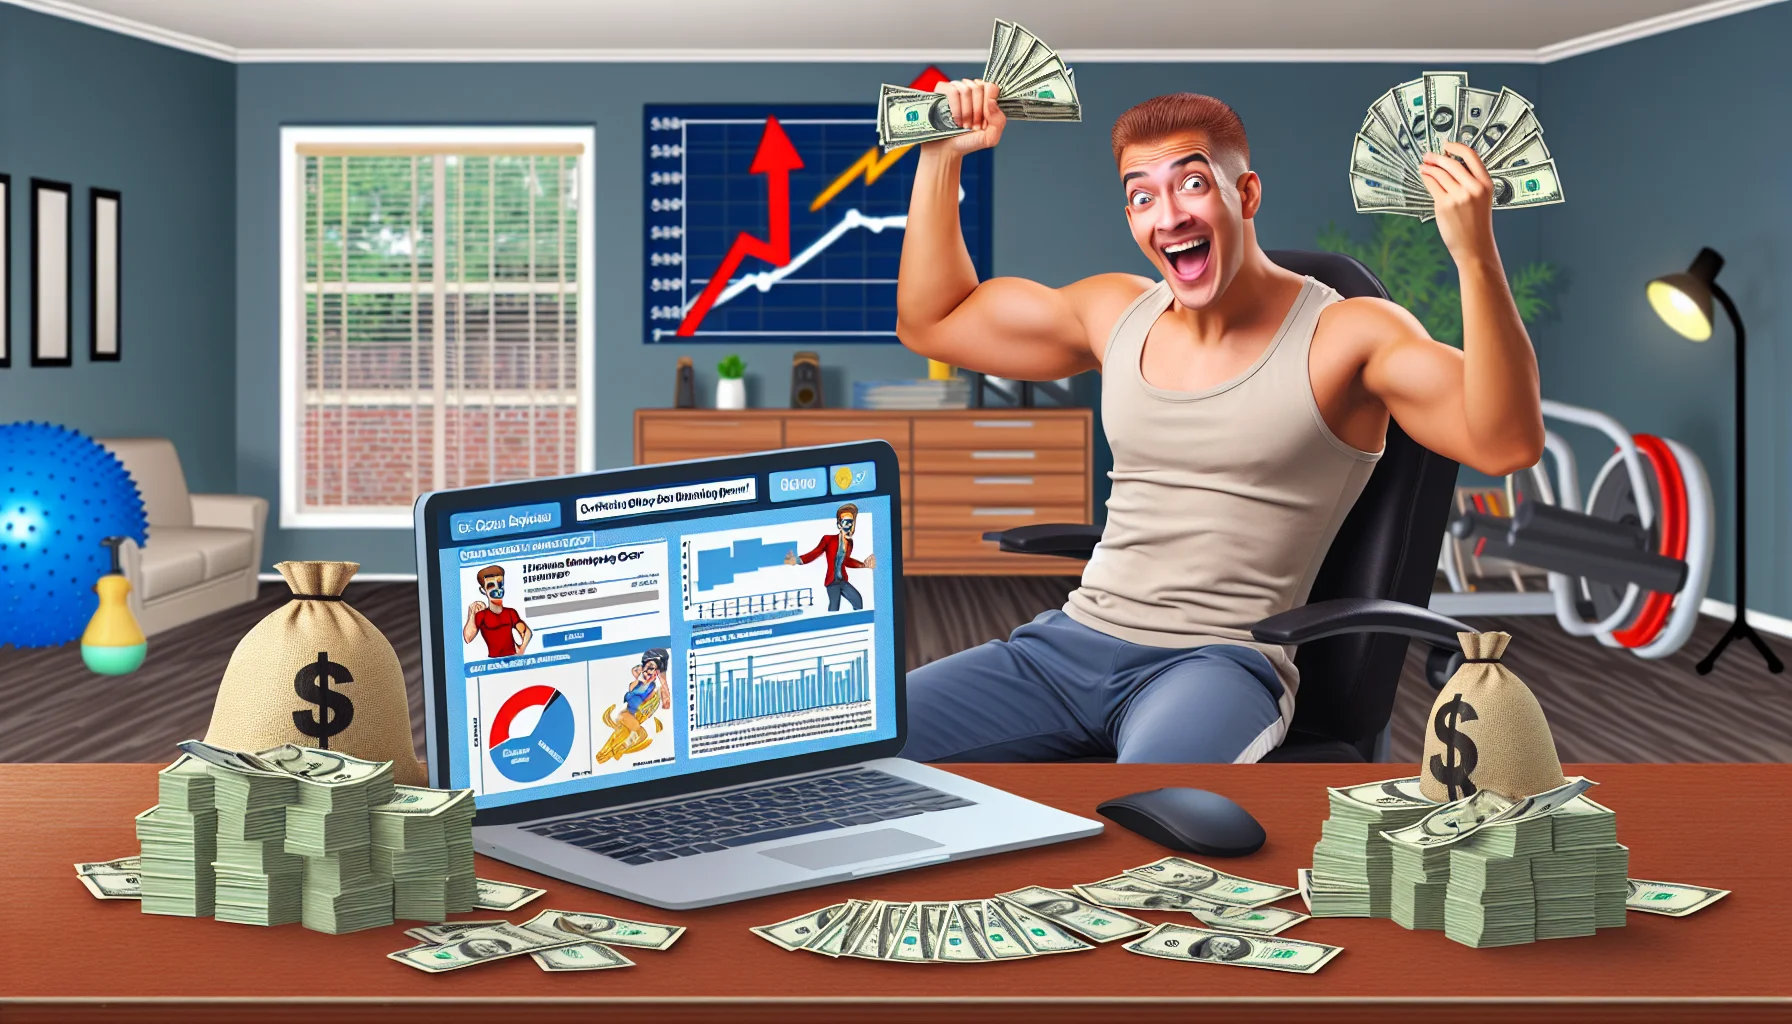 In a comic setup, depict an engaging scenario featuring the notion of an online money-making endeavor. Capture the scene with a laptop showing a humorous, positive review for a hypothetical fitness gear affiliate program. Surroundings could include stack of dollar bills indicating the earning potential, graph charts going up to show progress, and an enthusiastic person of Hispanic descent gleefully gesturing towards the screen. The background could be a comfortable home office space filled with fitness gear, subtly portraying the blend between the digital money-making world and the fitness realm.